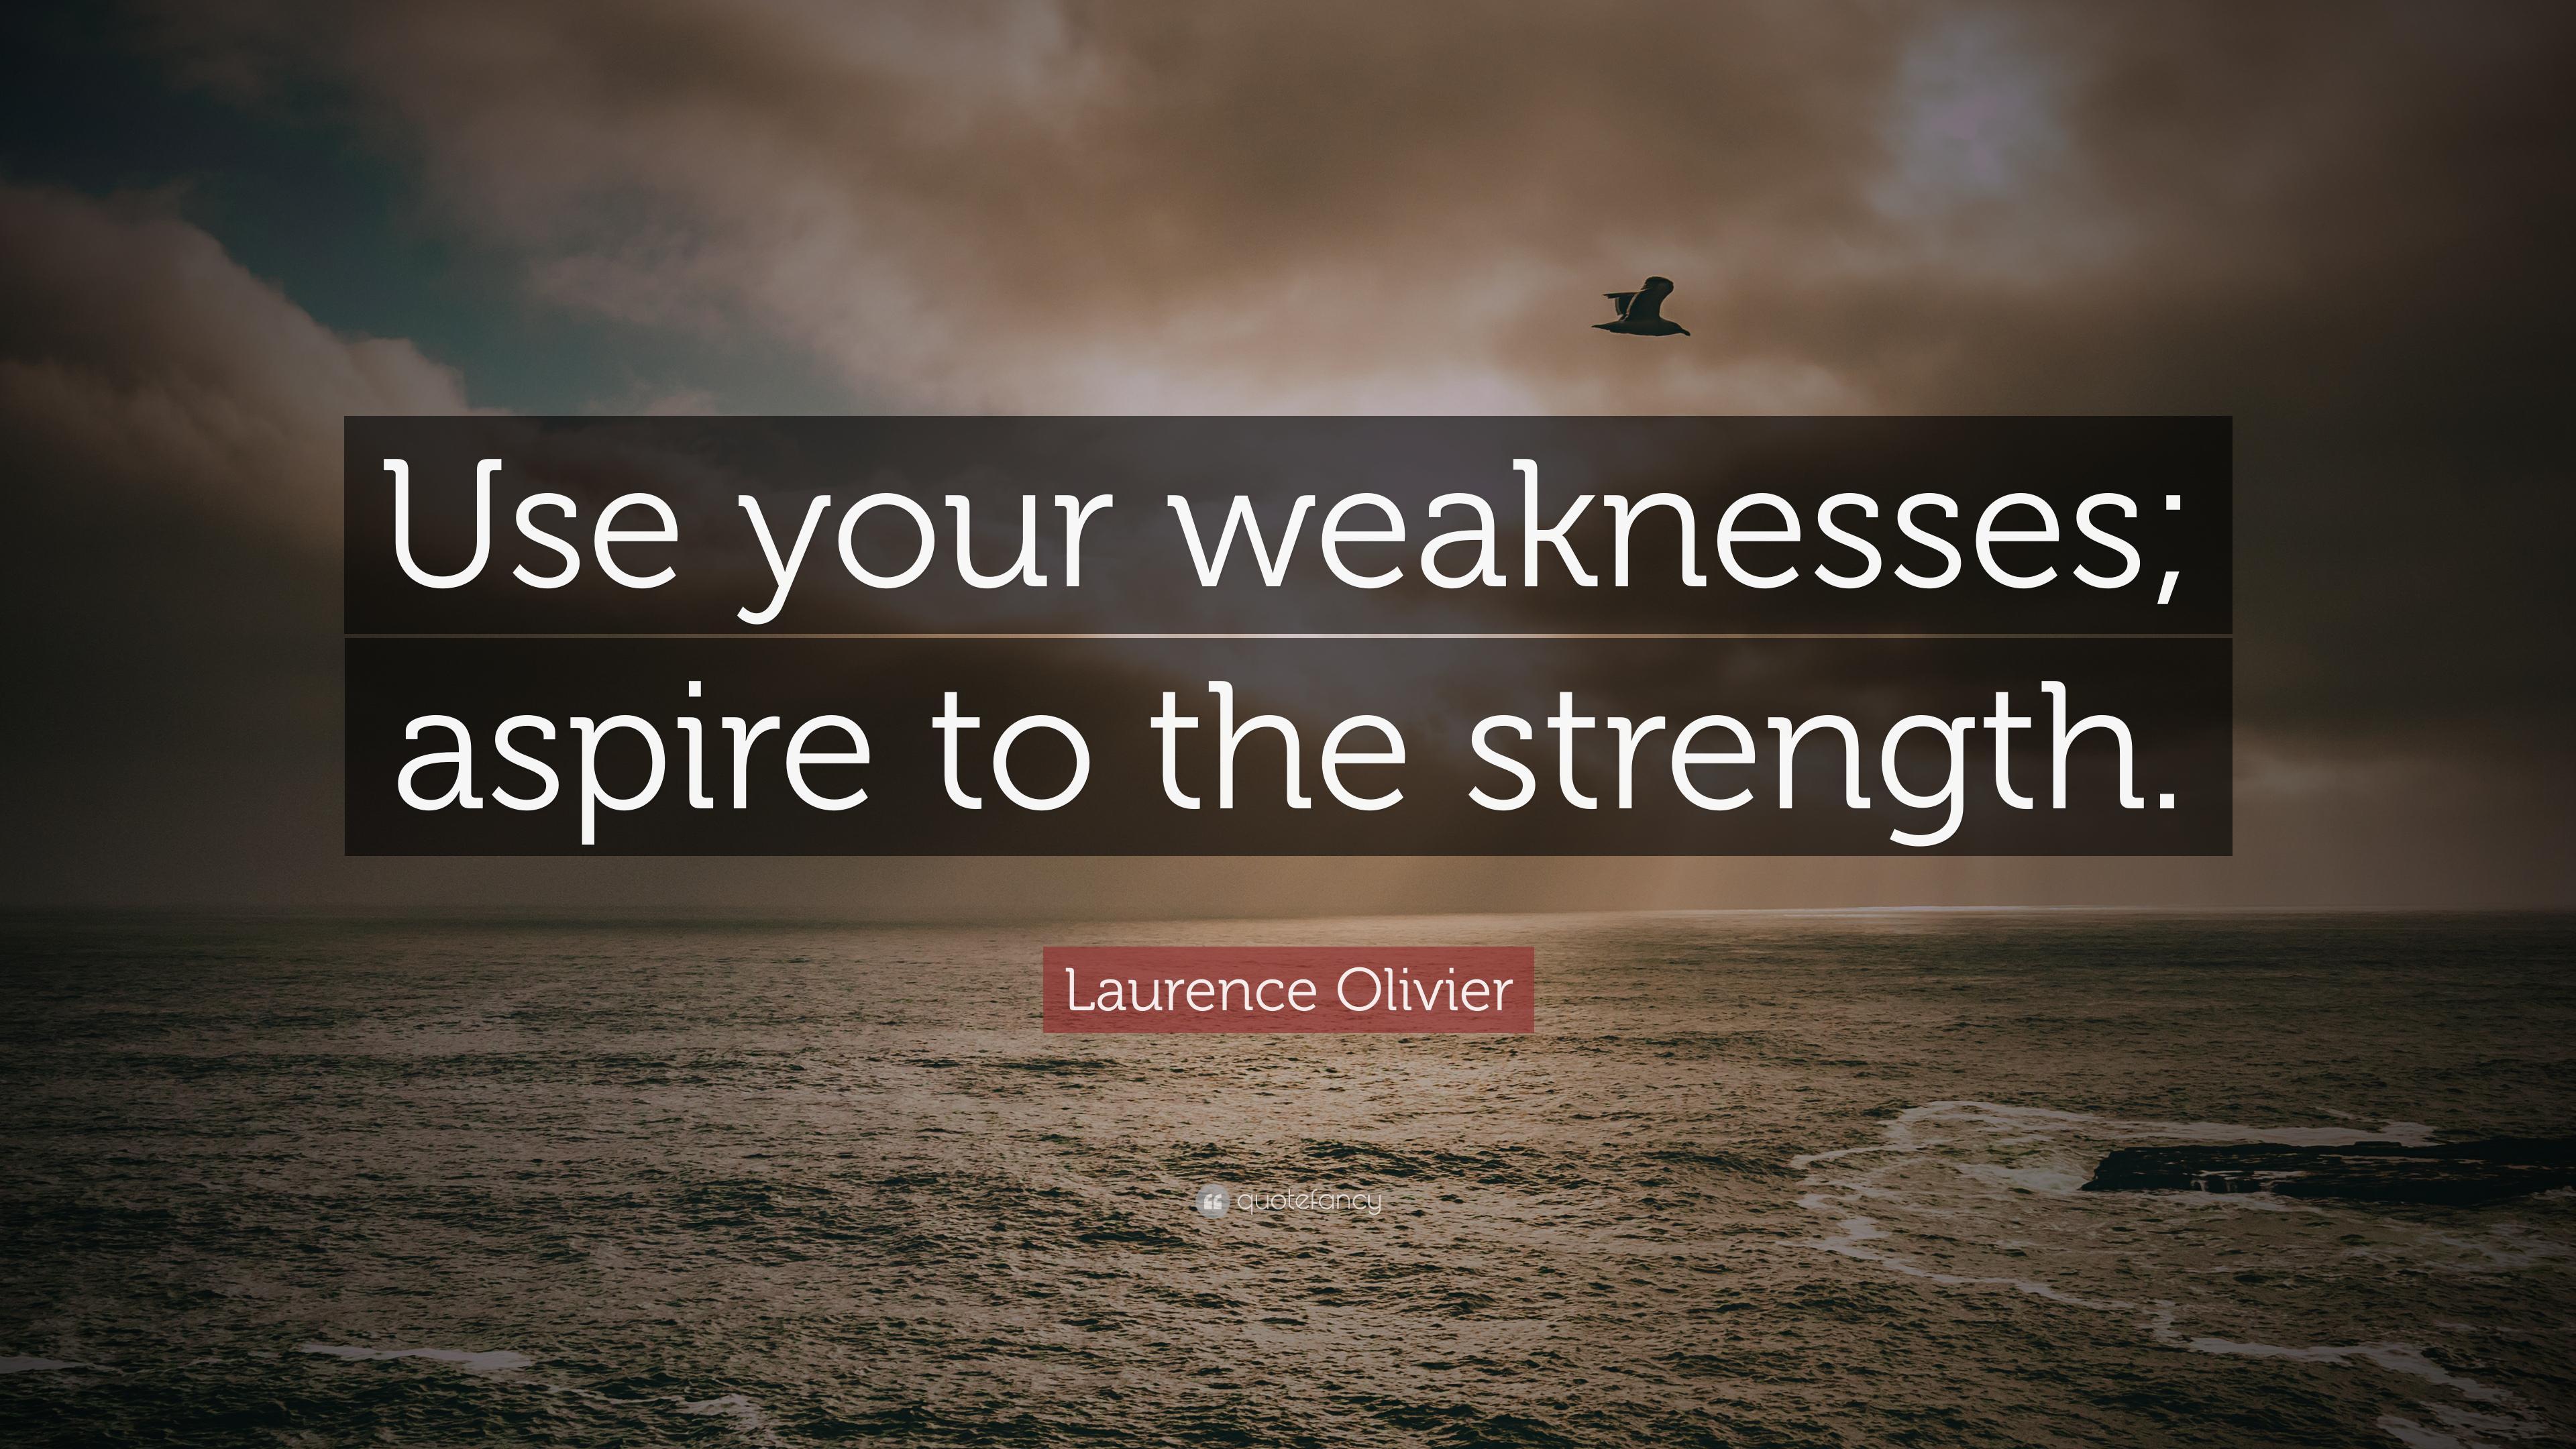 Laurence Olivier Quote: “Use your weaknesses; aspire to the strength